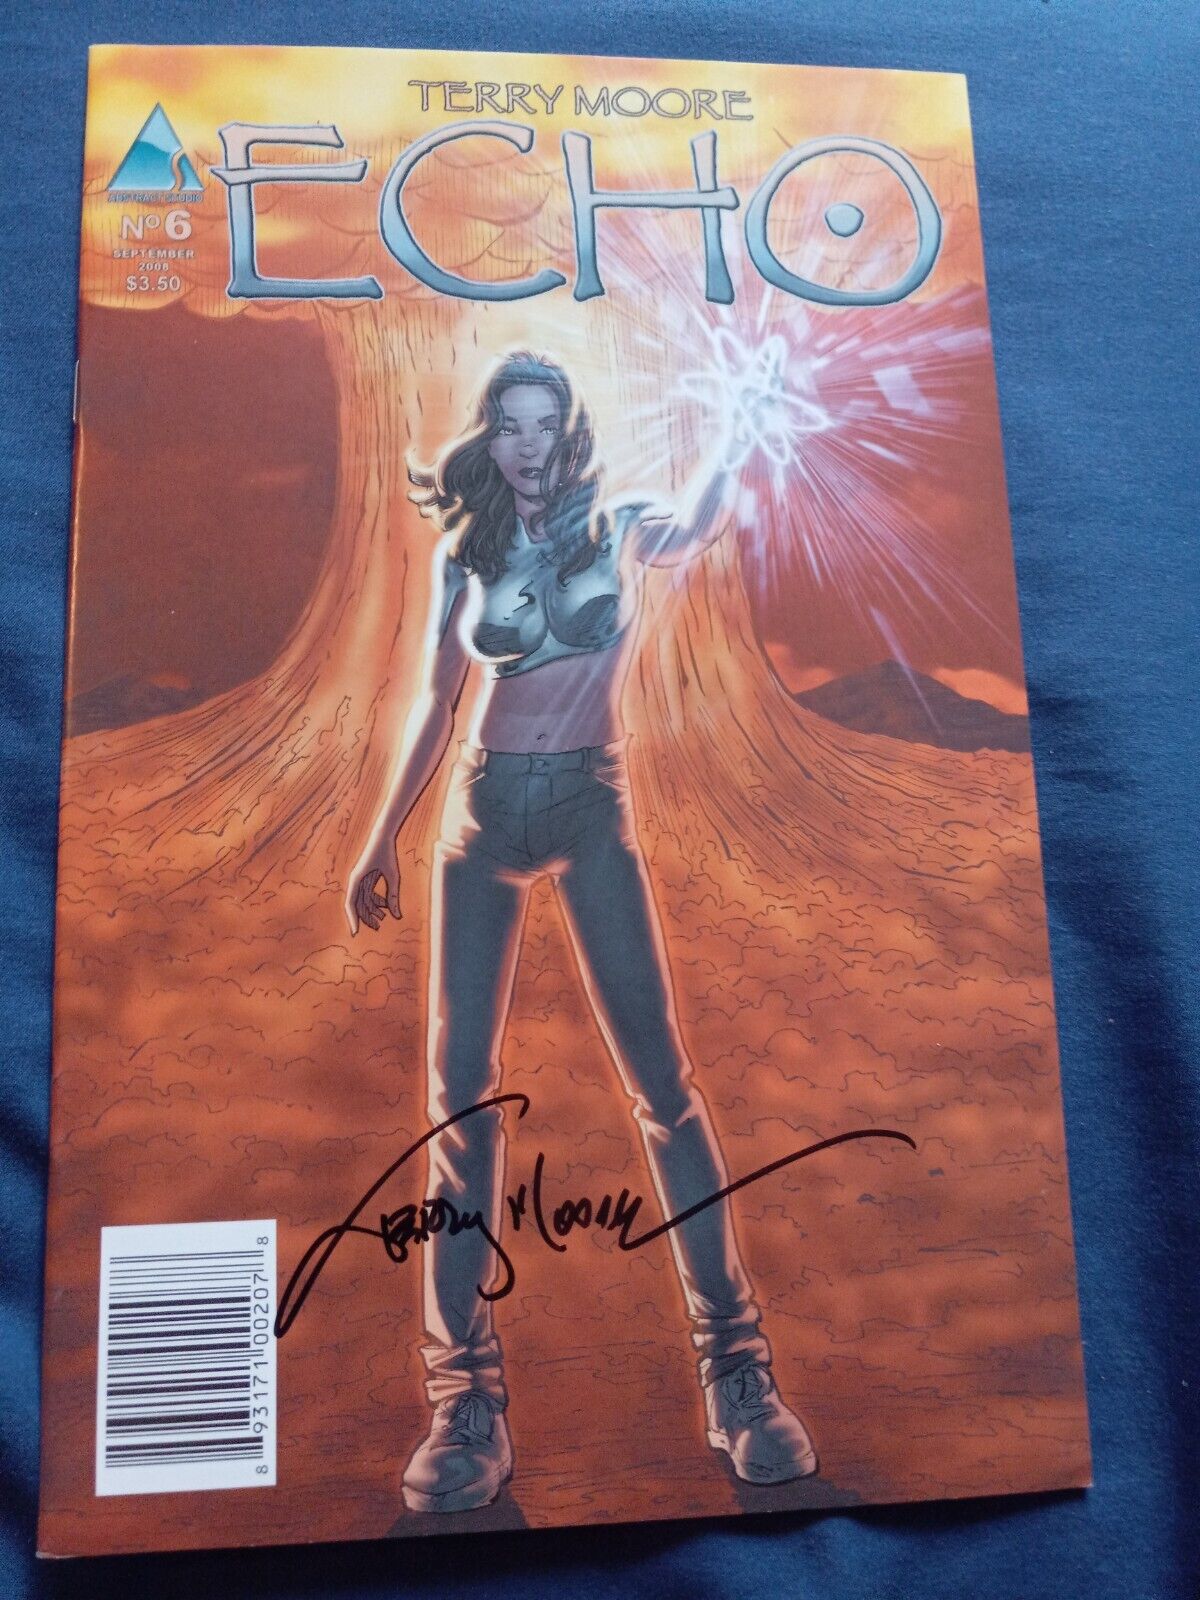 Echo # 6 ; Abstract Studios |  signed  Terry Moore